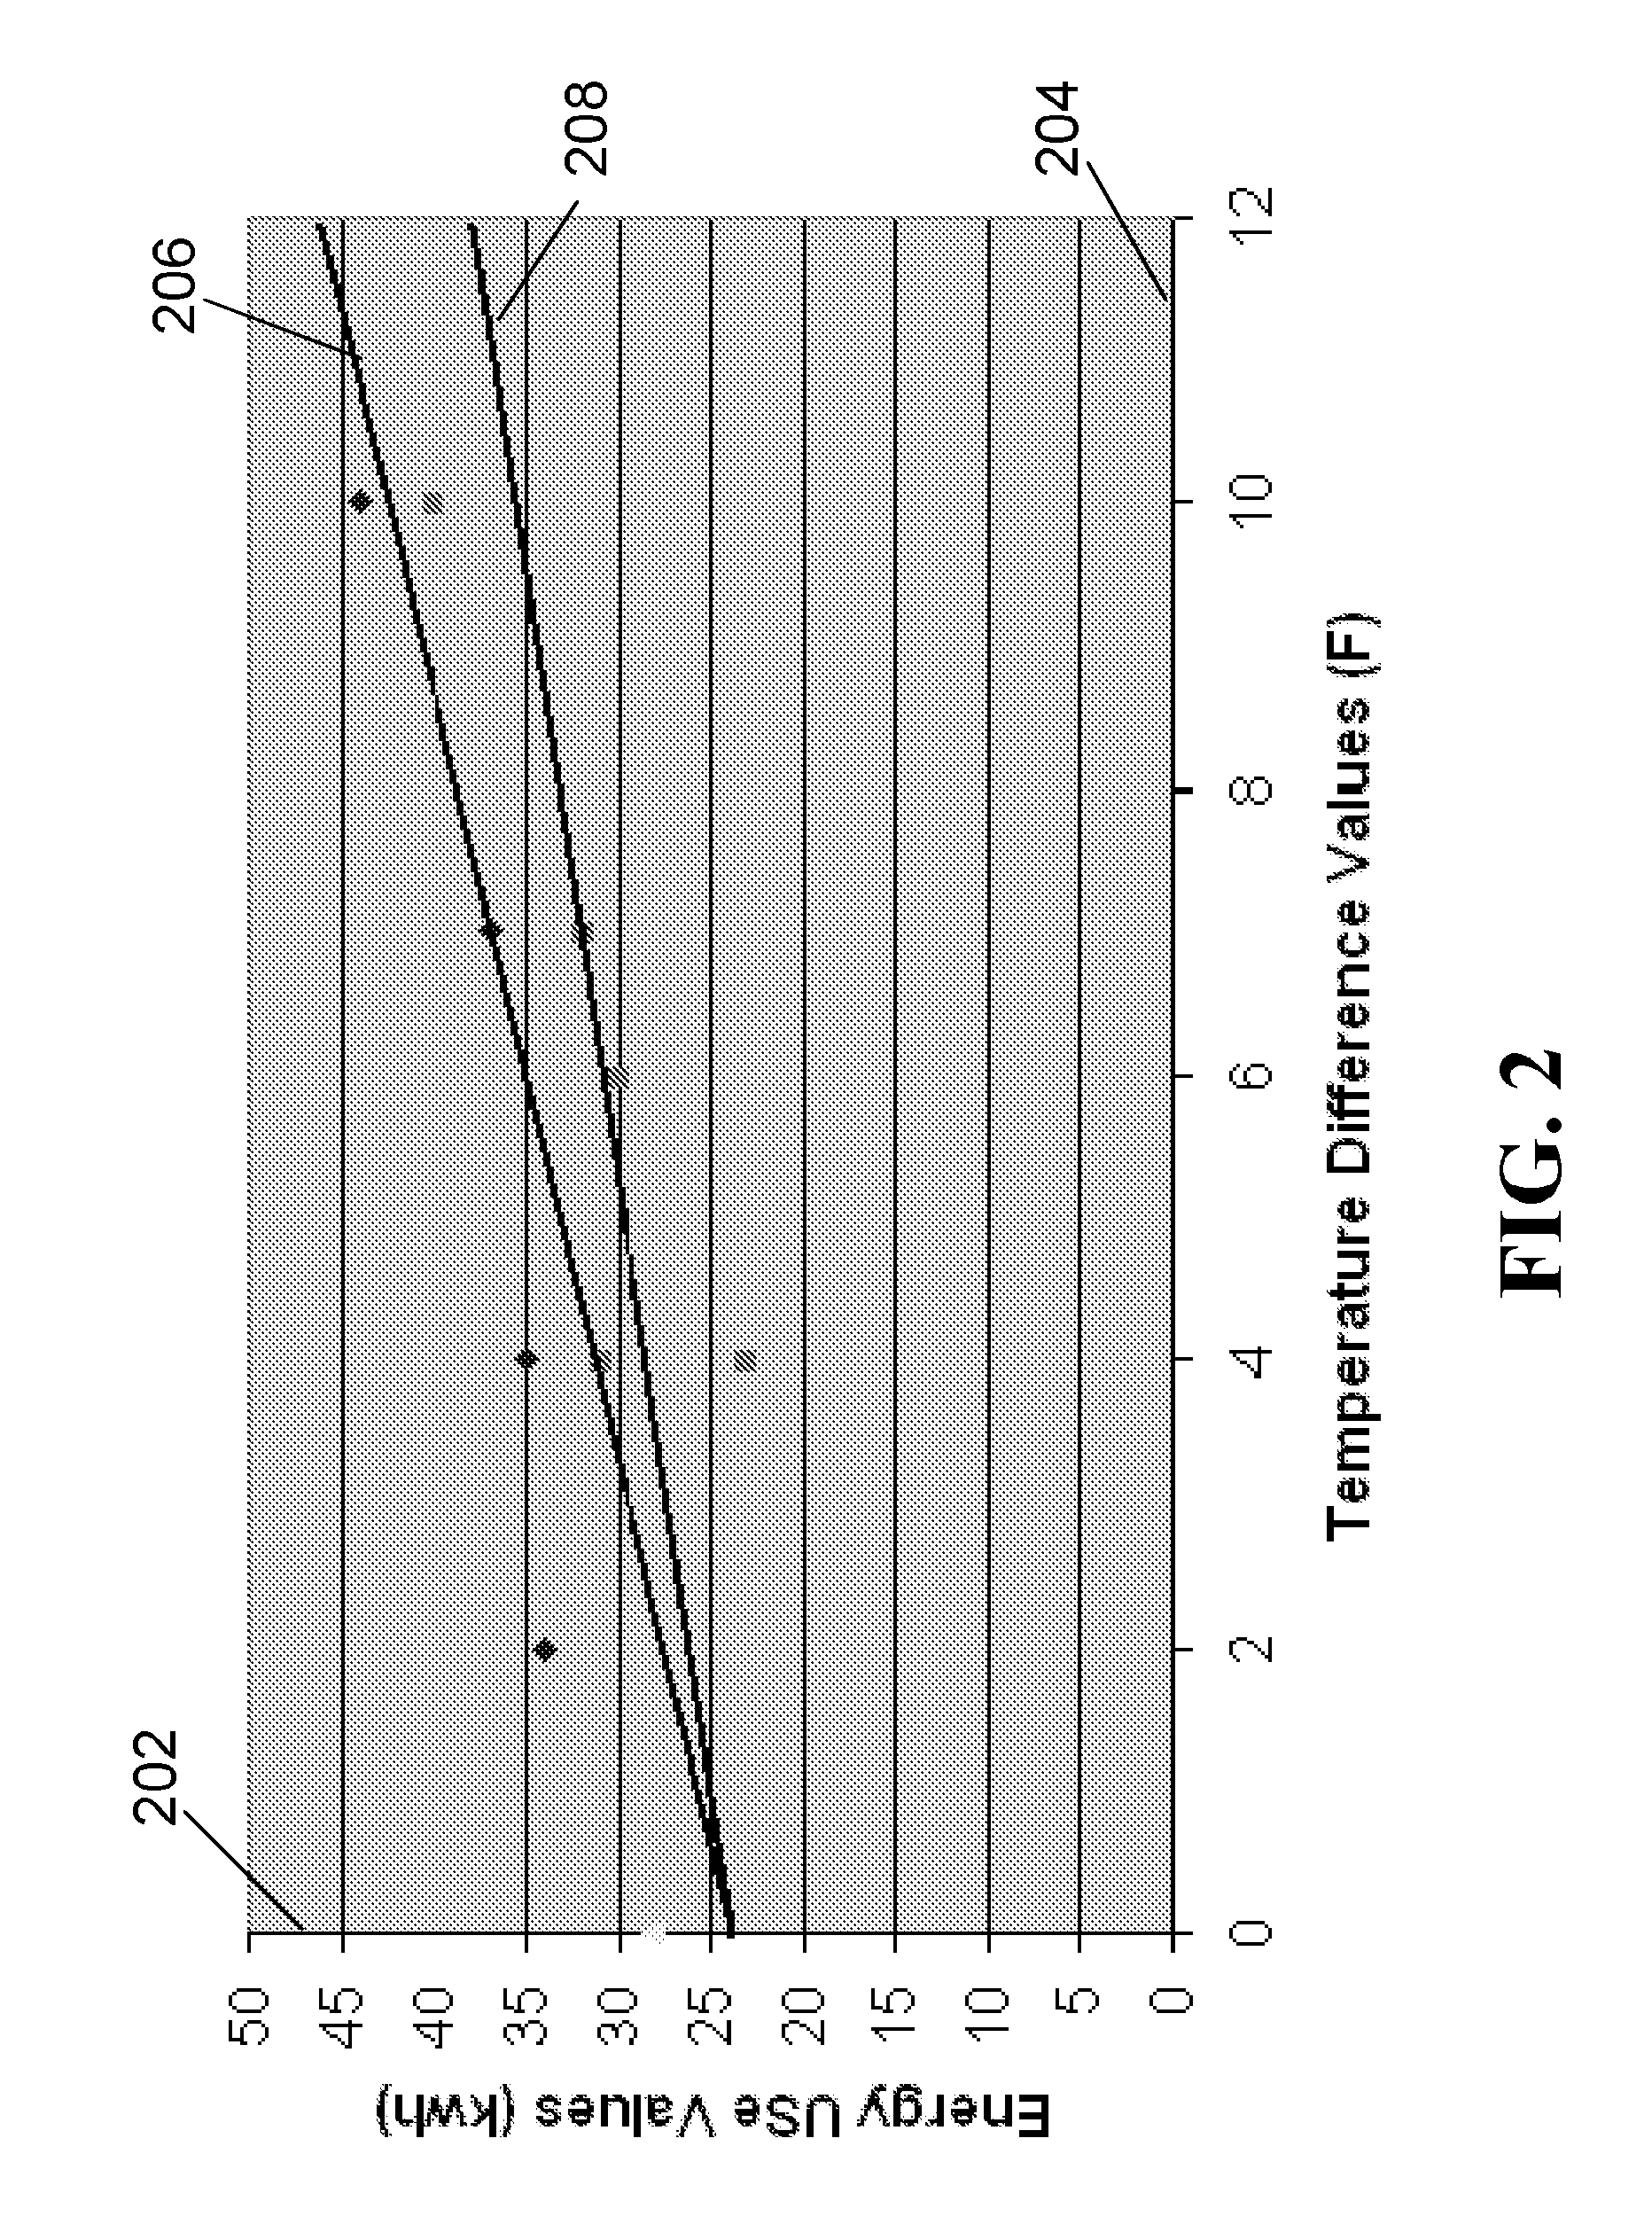 Method and system for disaggregating heating and cooling energy use from other building energy use